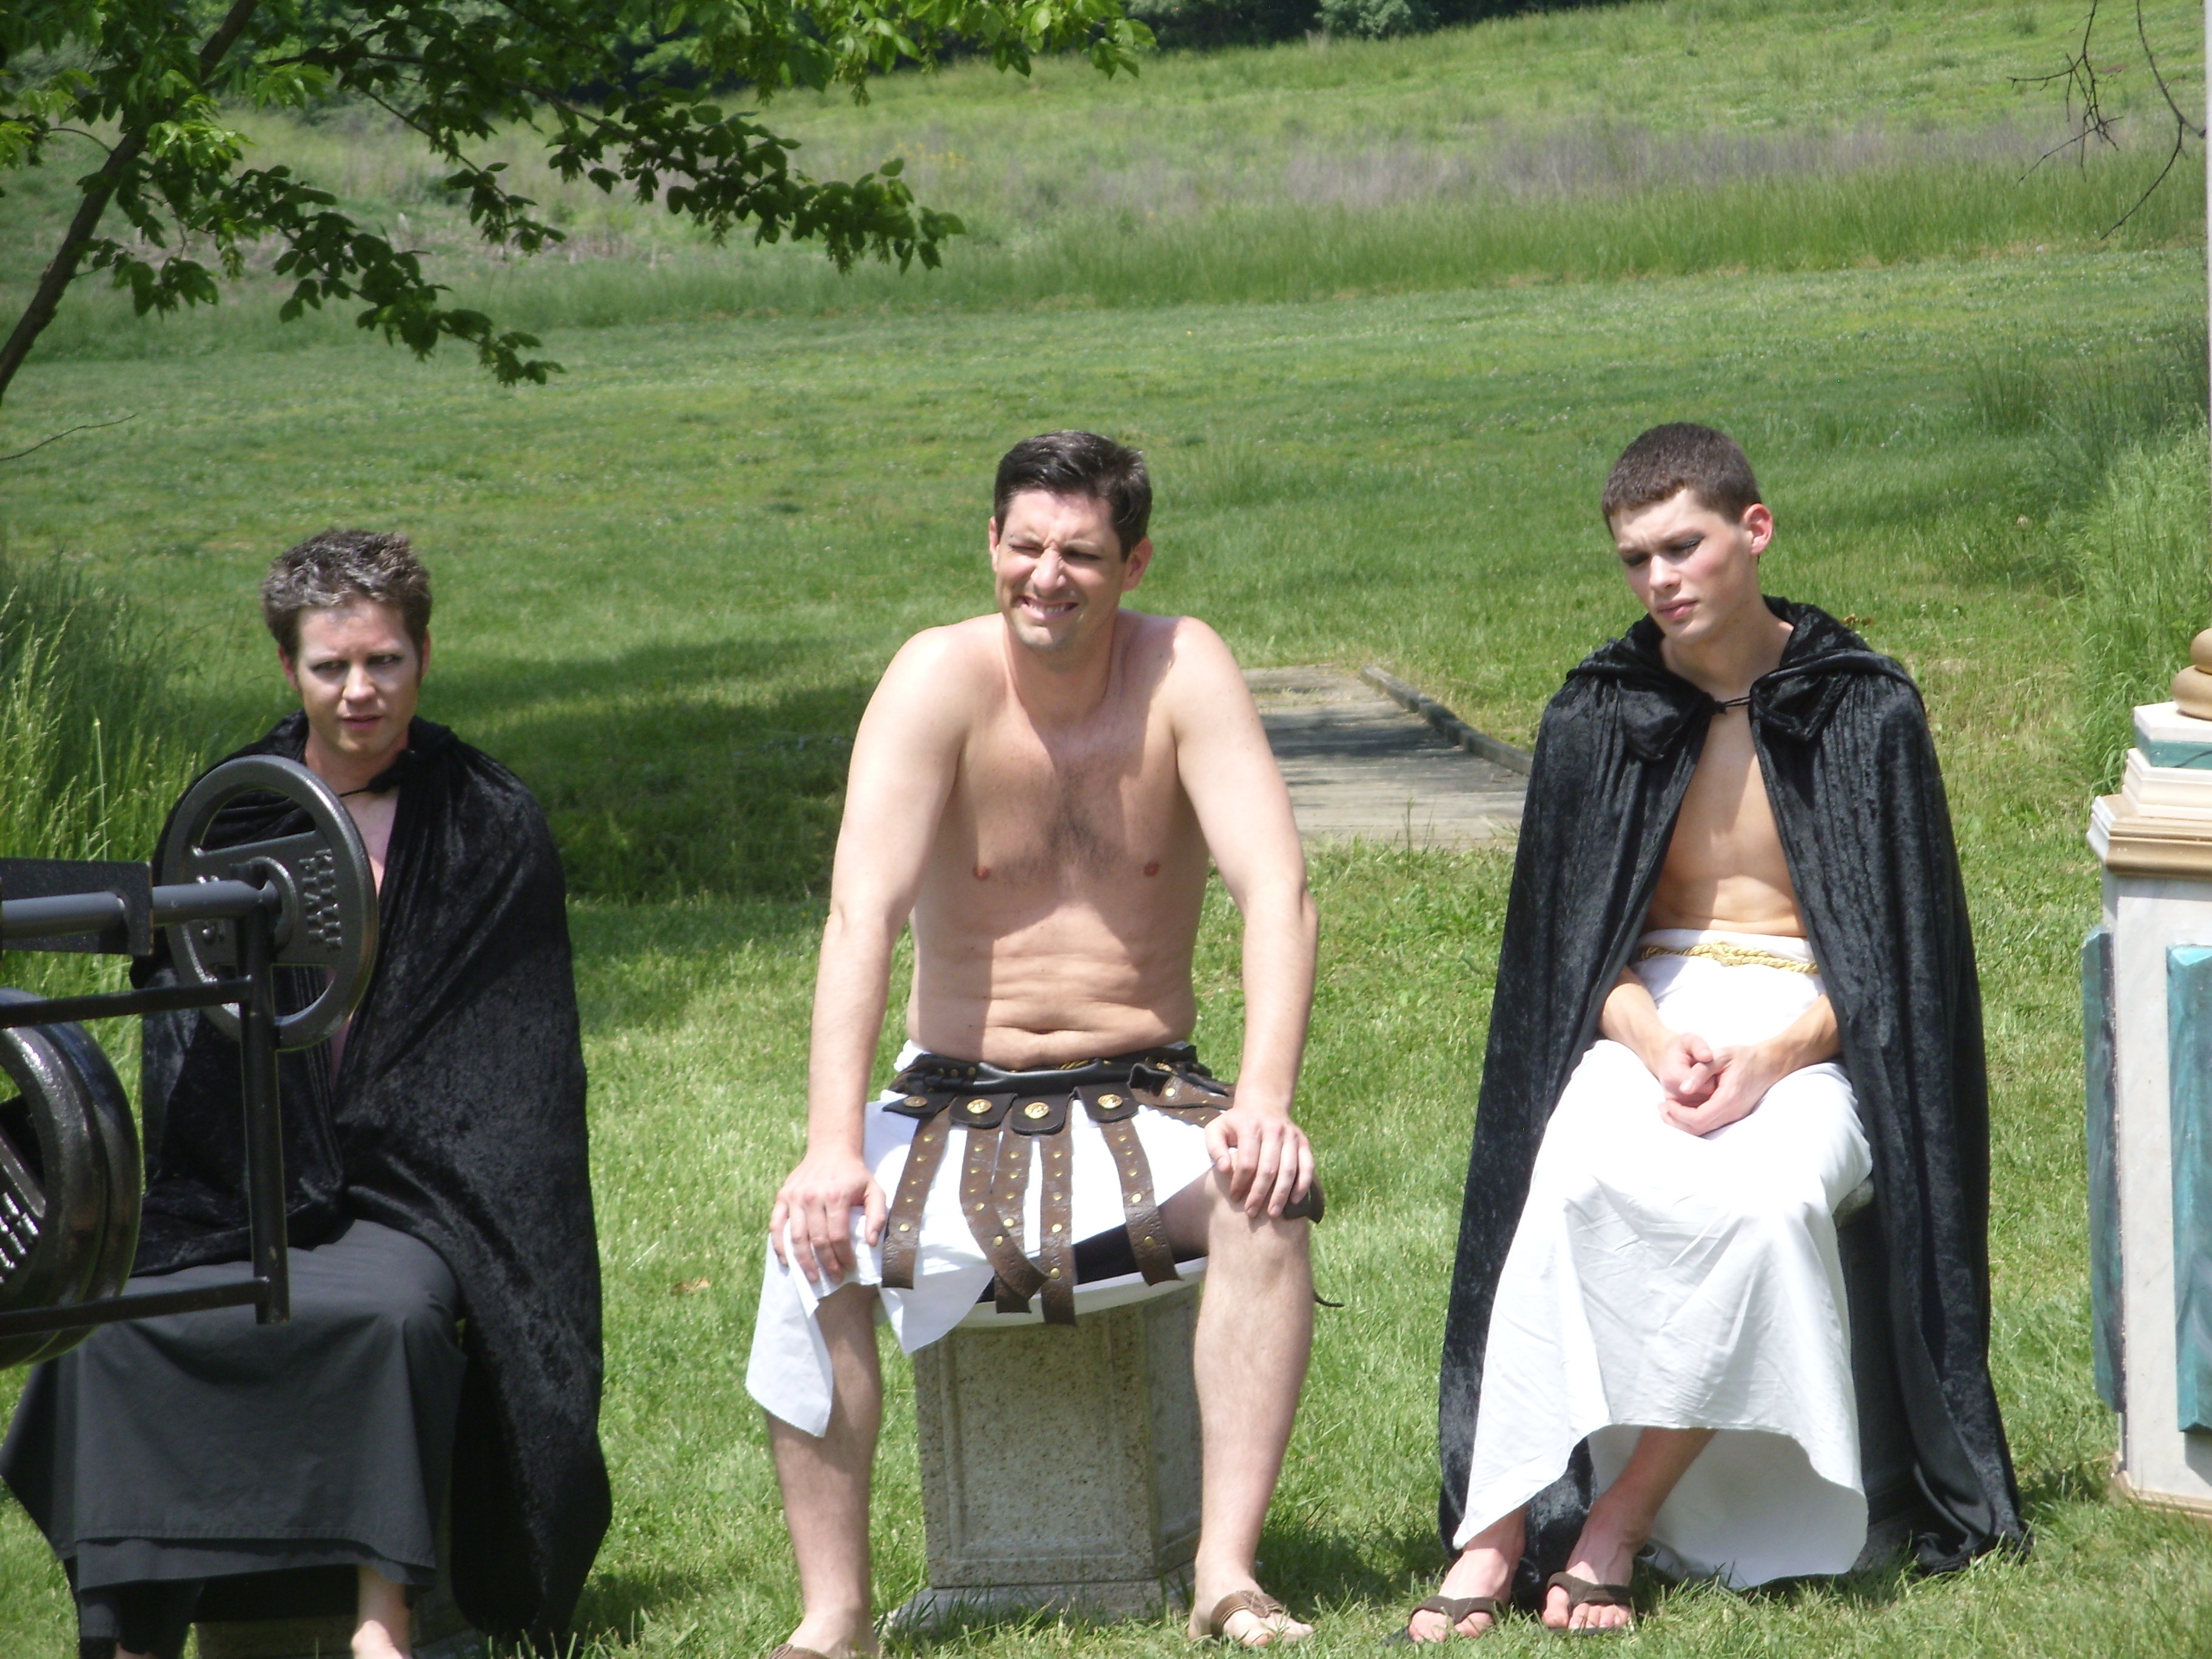 Still of Bryan Kreutz, Joe McGettigan, and Brayden 'Brian' Patterson in Hercules: The Brave and the Bold